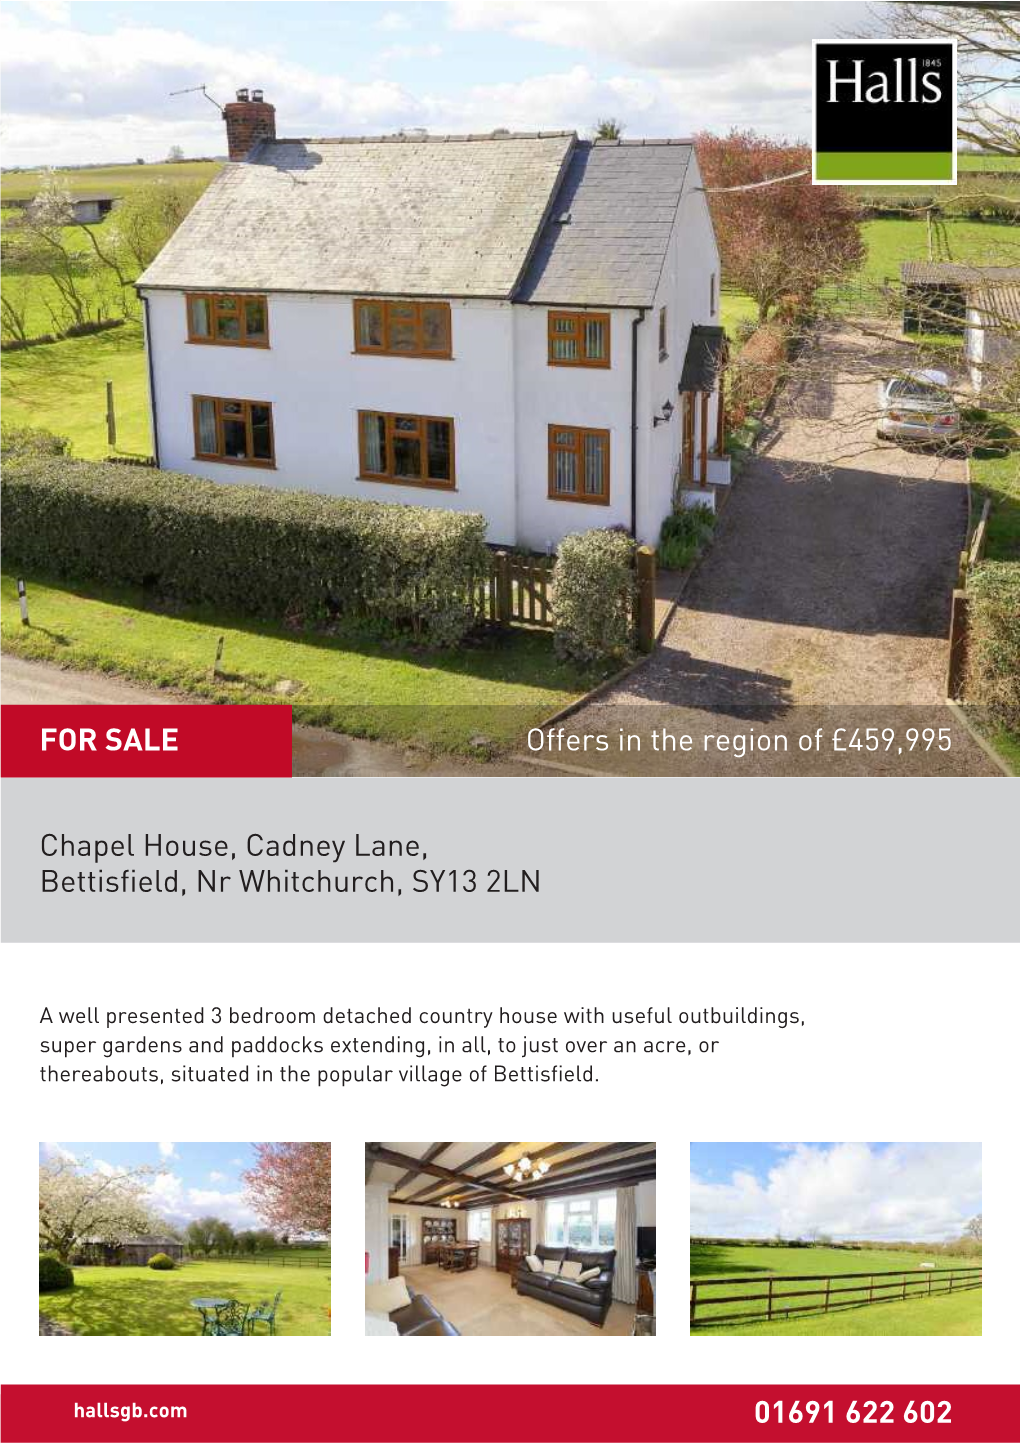 Chapel House, Cadney Lane, Bettisfield, Nr Whitchurch, SY13 2LN